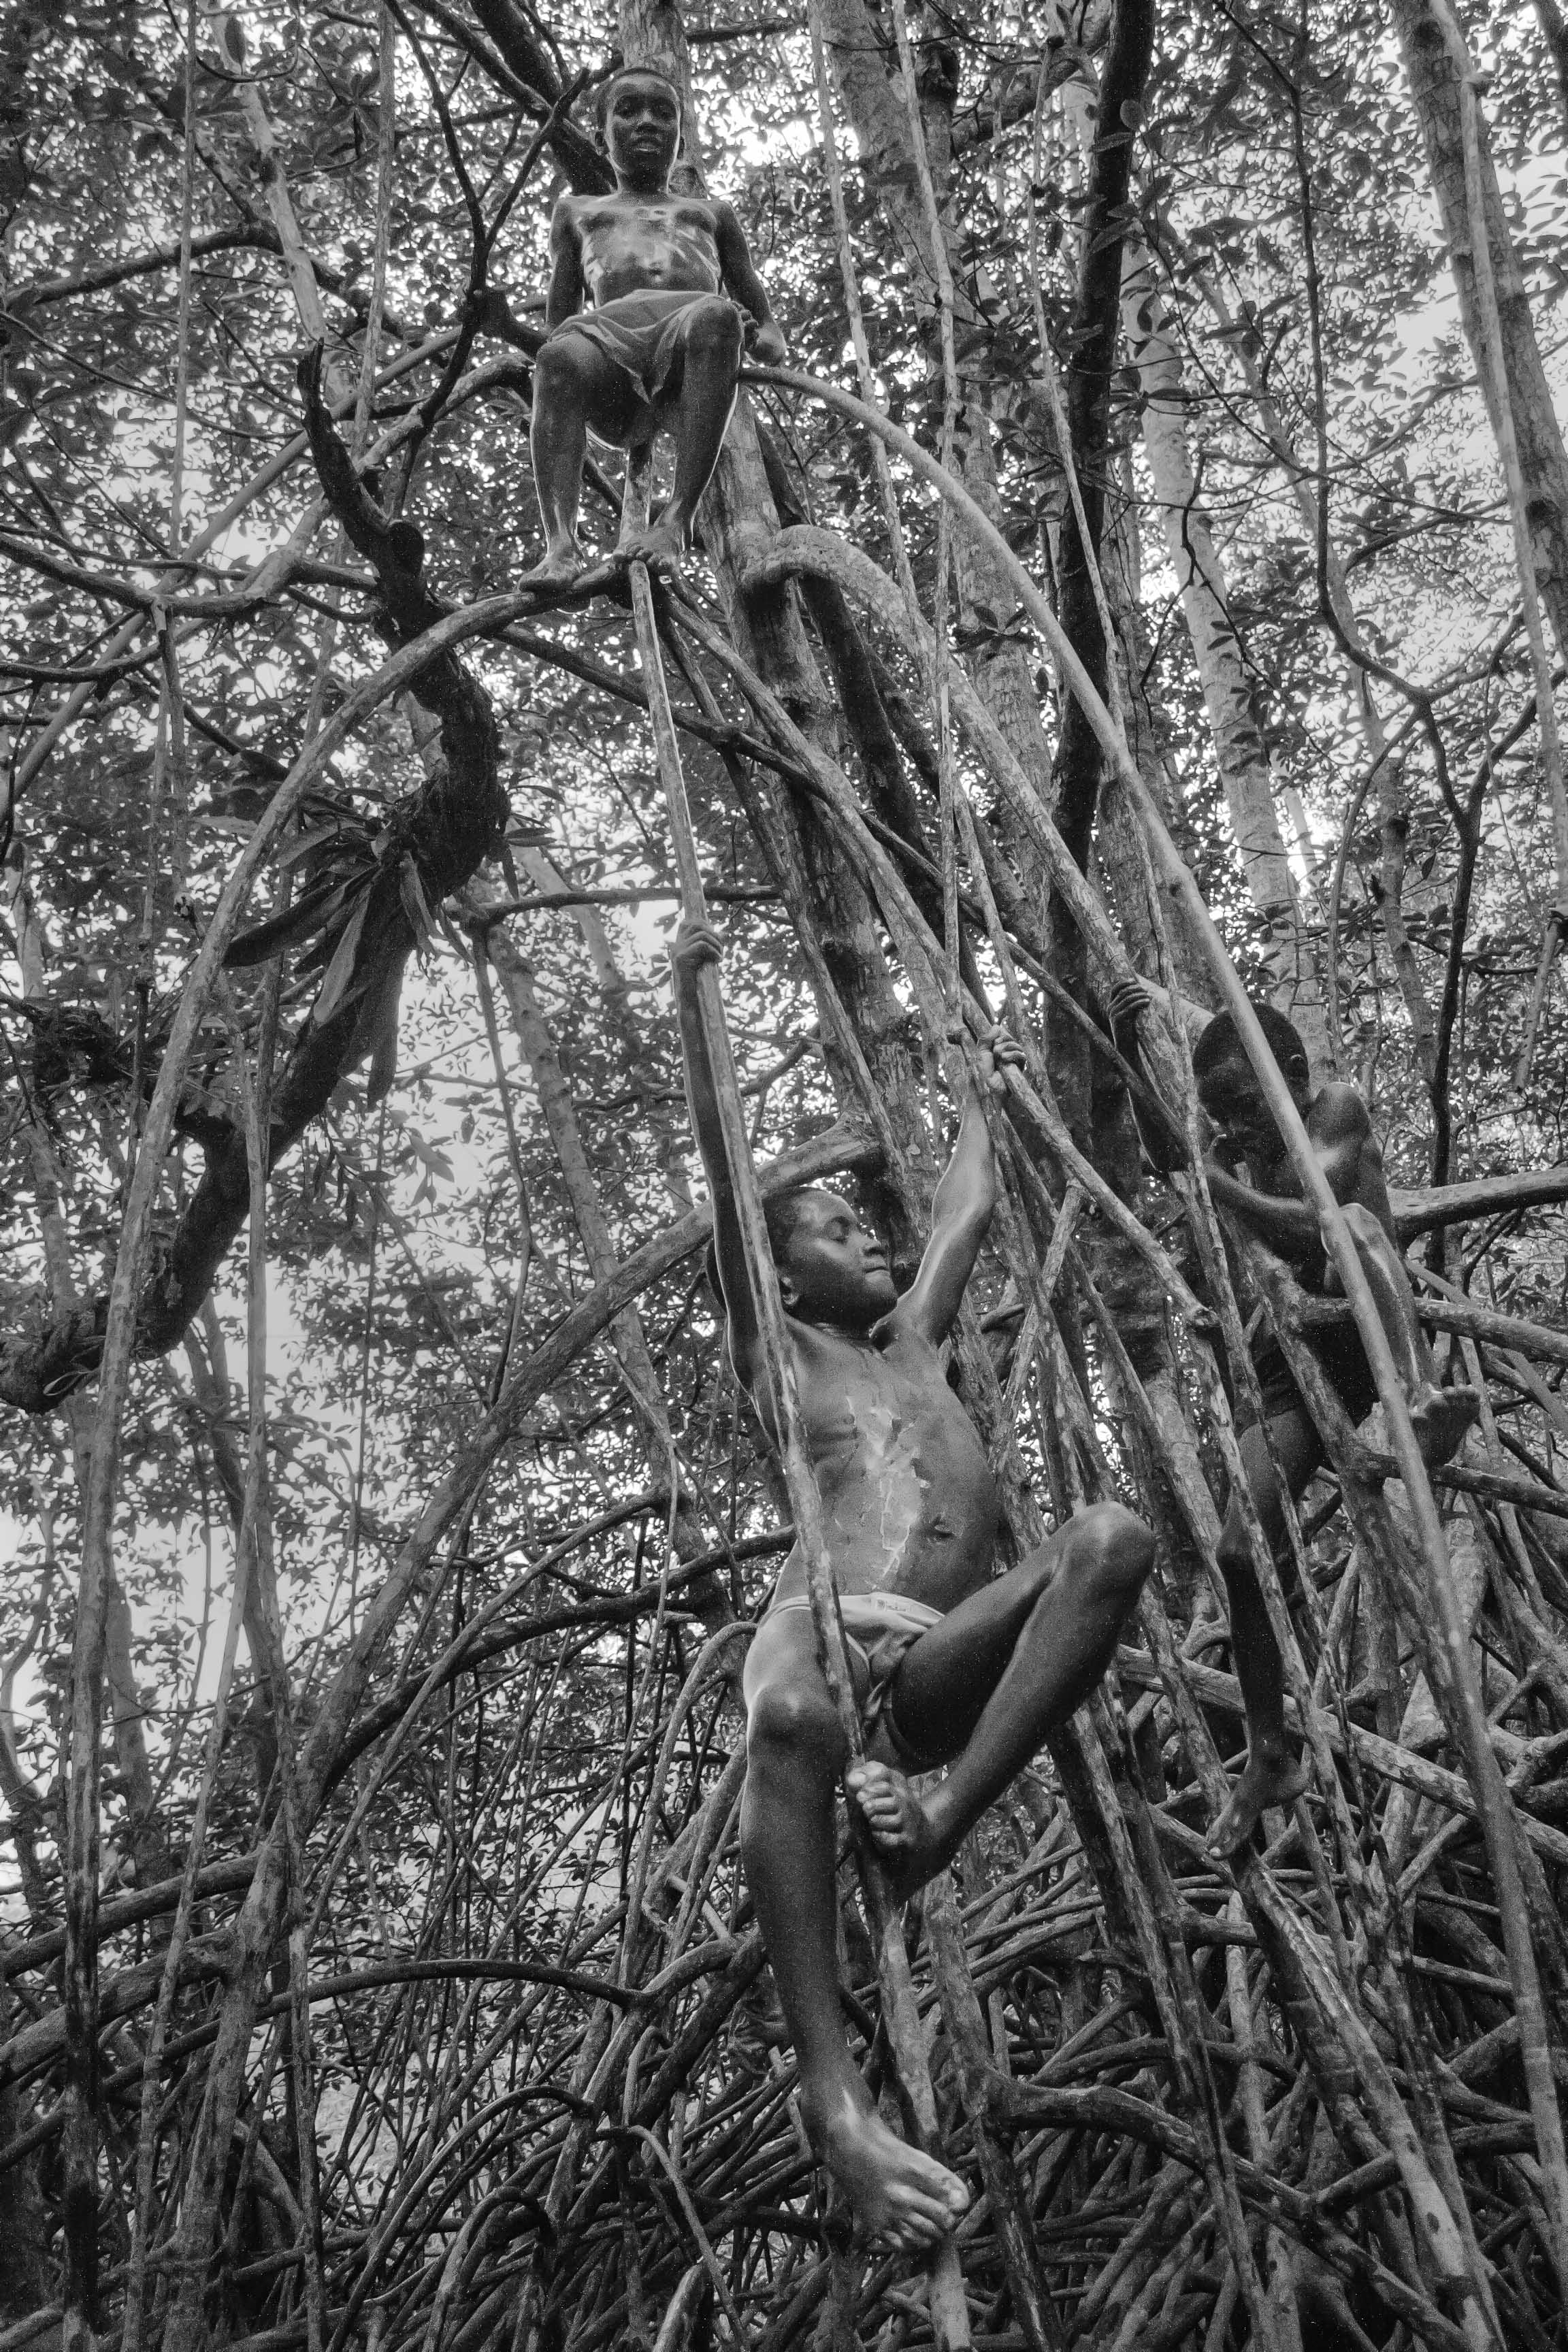  Children play on the roots of the mangroves in the Cayapas Mataje Reserve. Their movements are effortless as if the branches and roots were extensions of their bodies. 2010. 